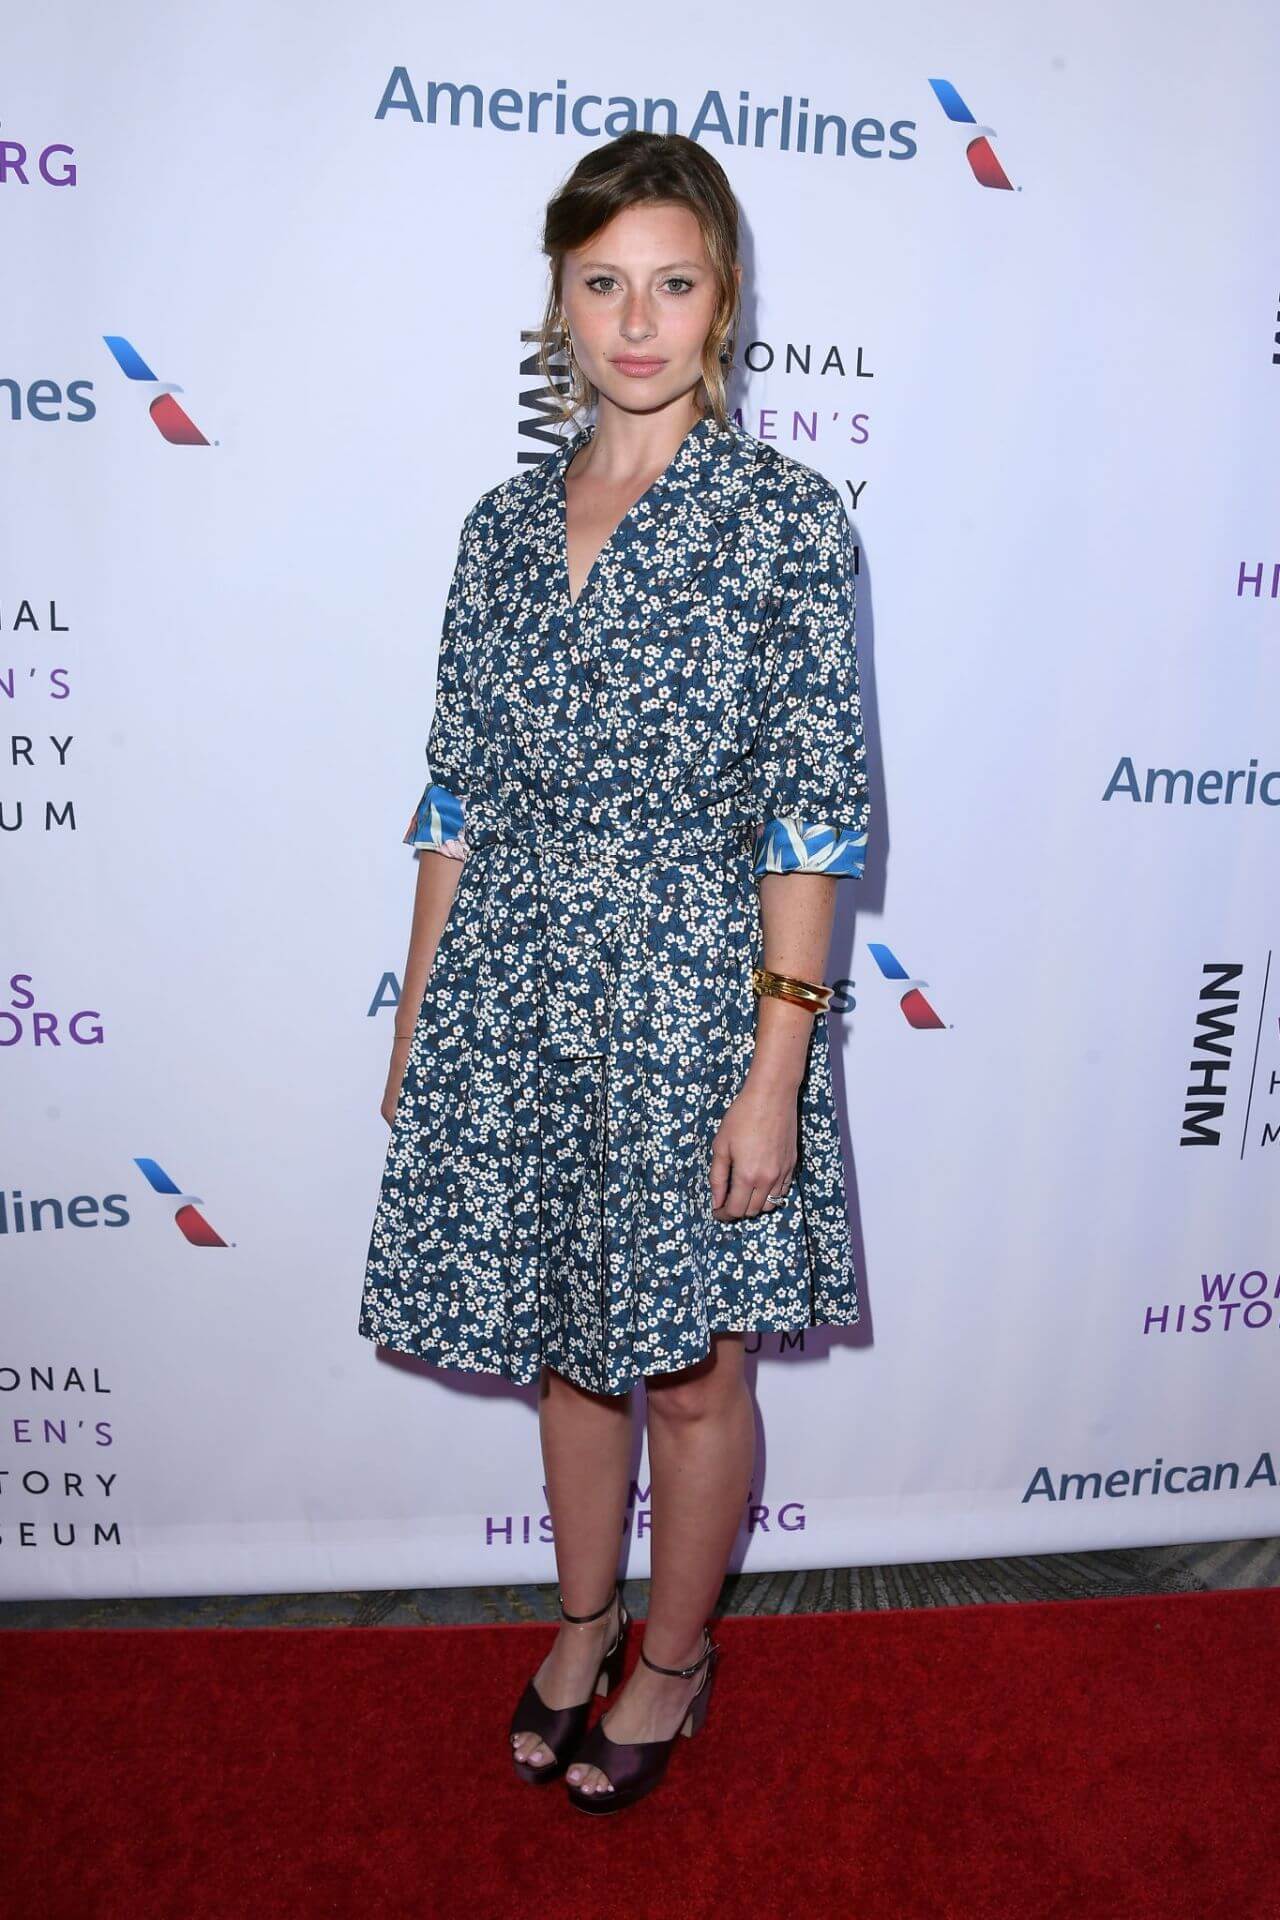 Alyson Aly Michalka - In Blue Printed Collar Short Gown With Golden Bracelet